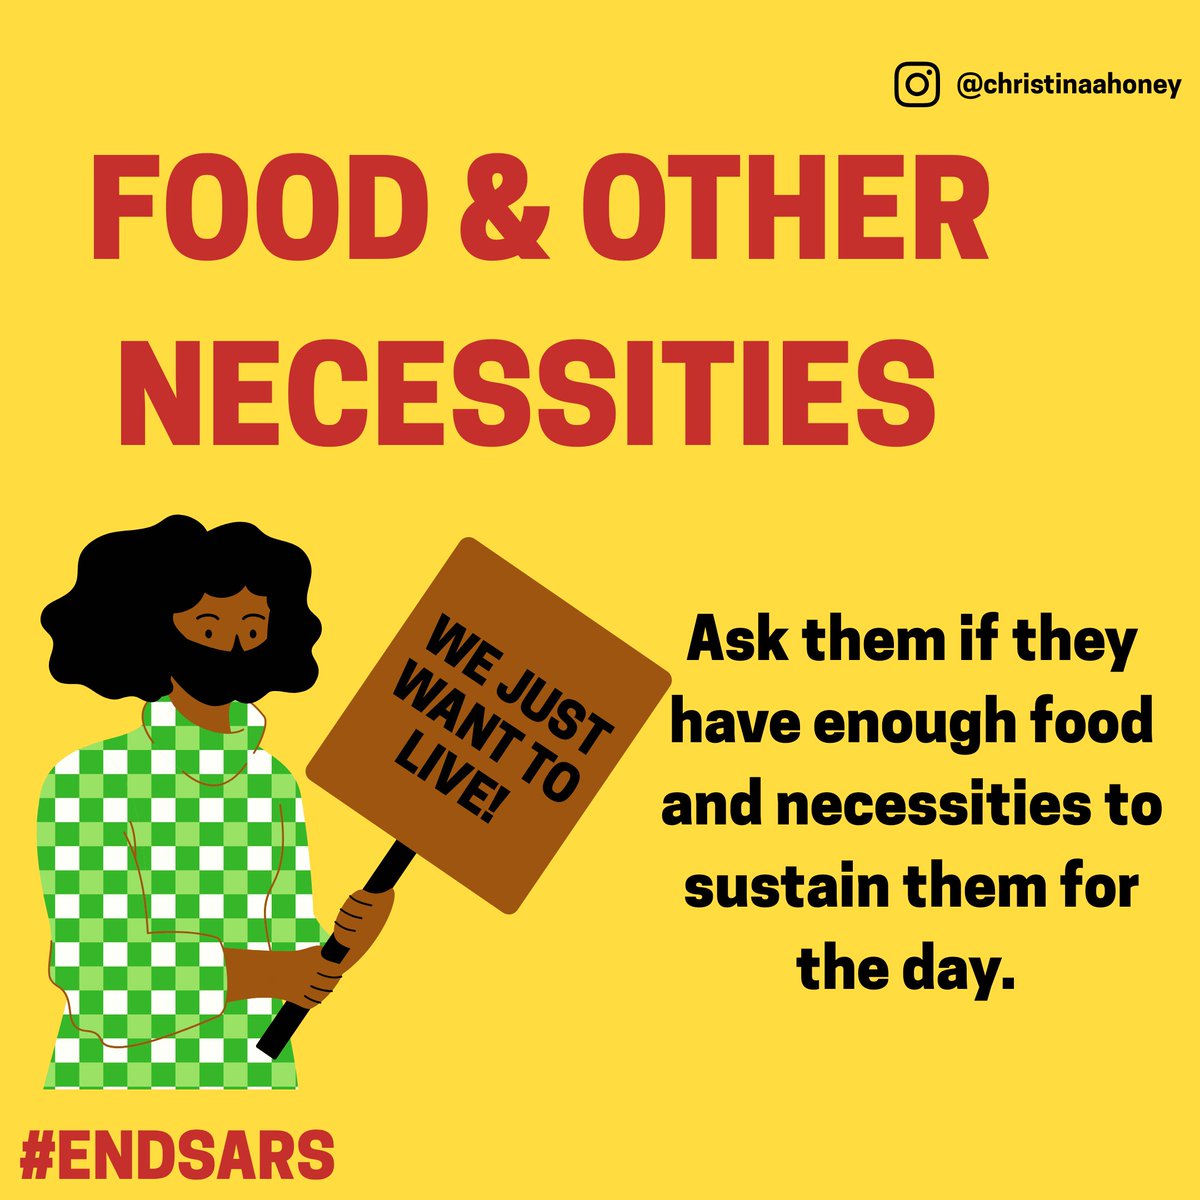 FOOD & OTHER NECESSITIES Check if people have the food and necessities that they need for today. Lagos is currently in a lockdown and if there is someone near by that can help, that would be useful.  #ENDSARS  